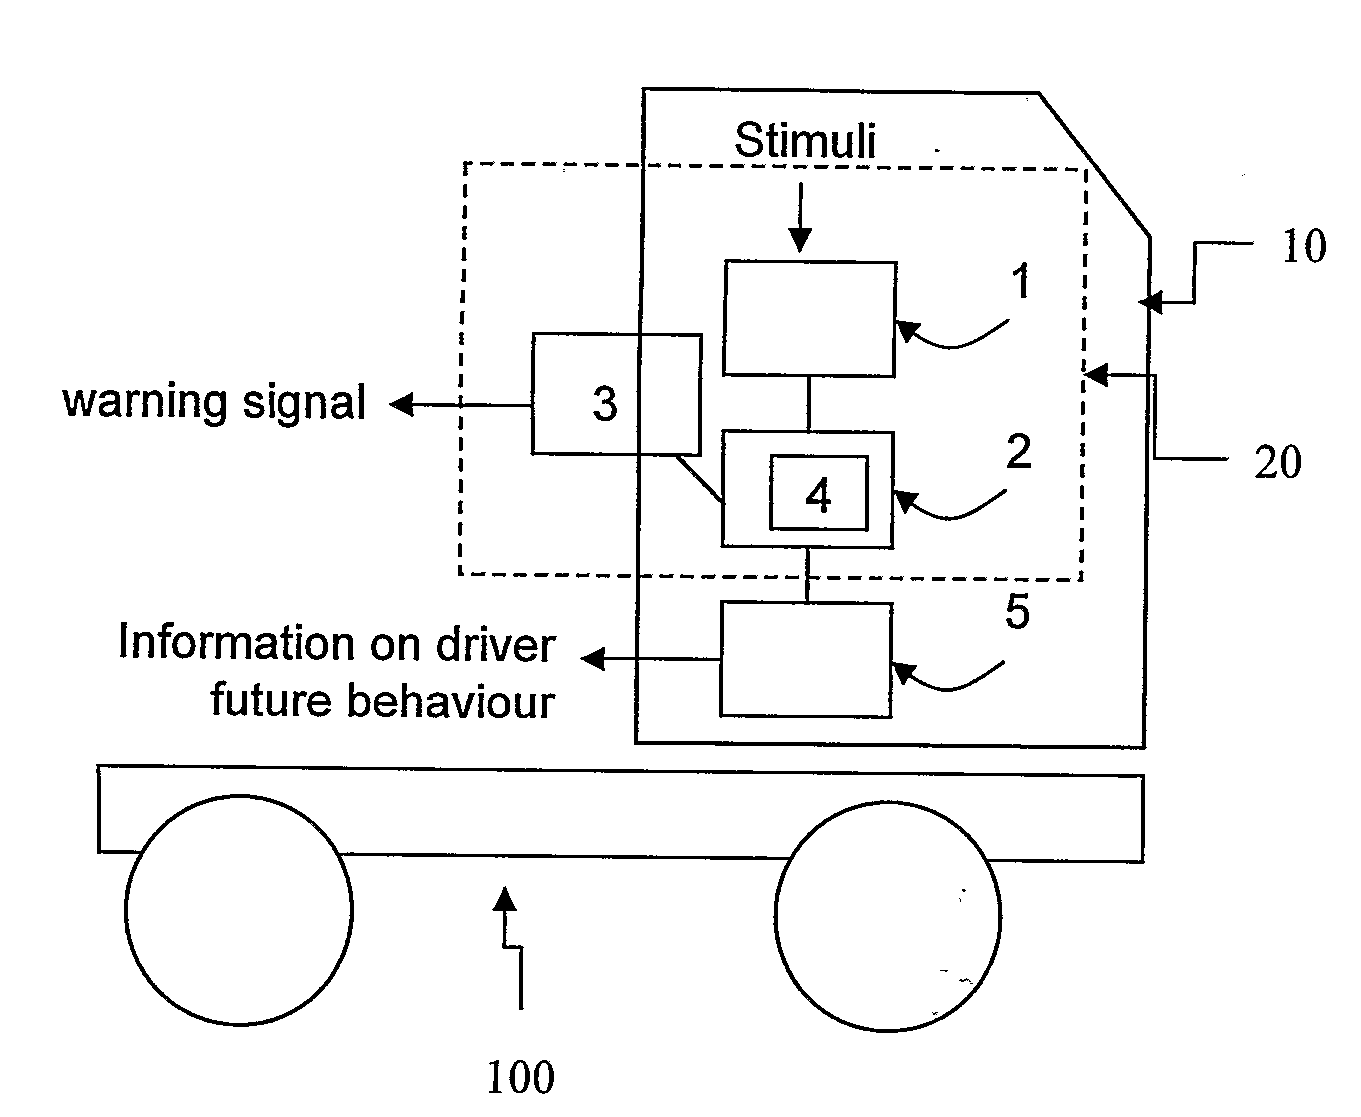 Method and system to enhance traffic safety and efficiency for vehicles